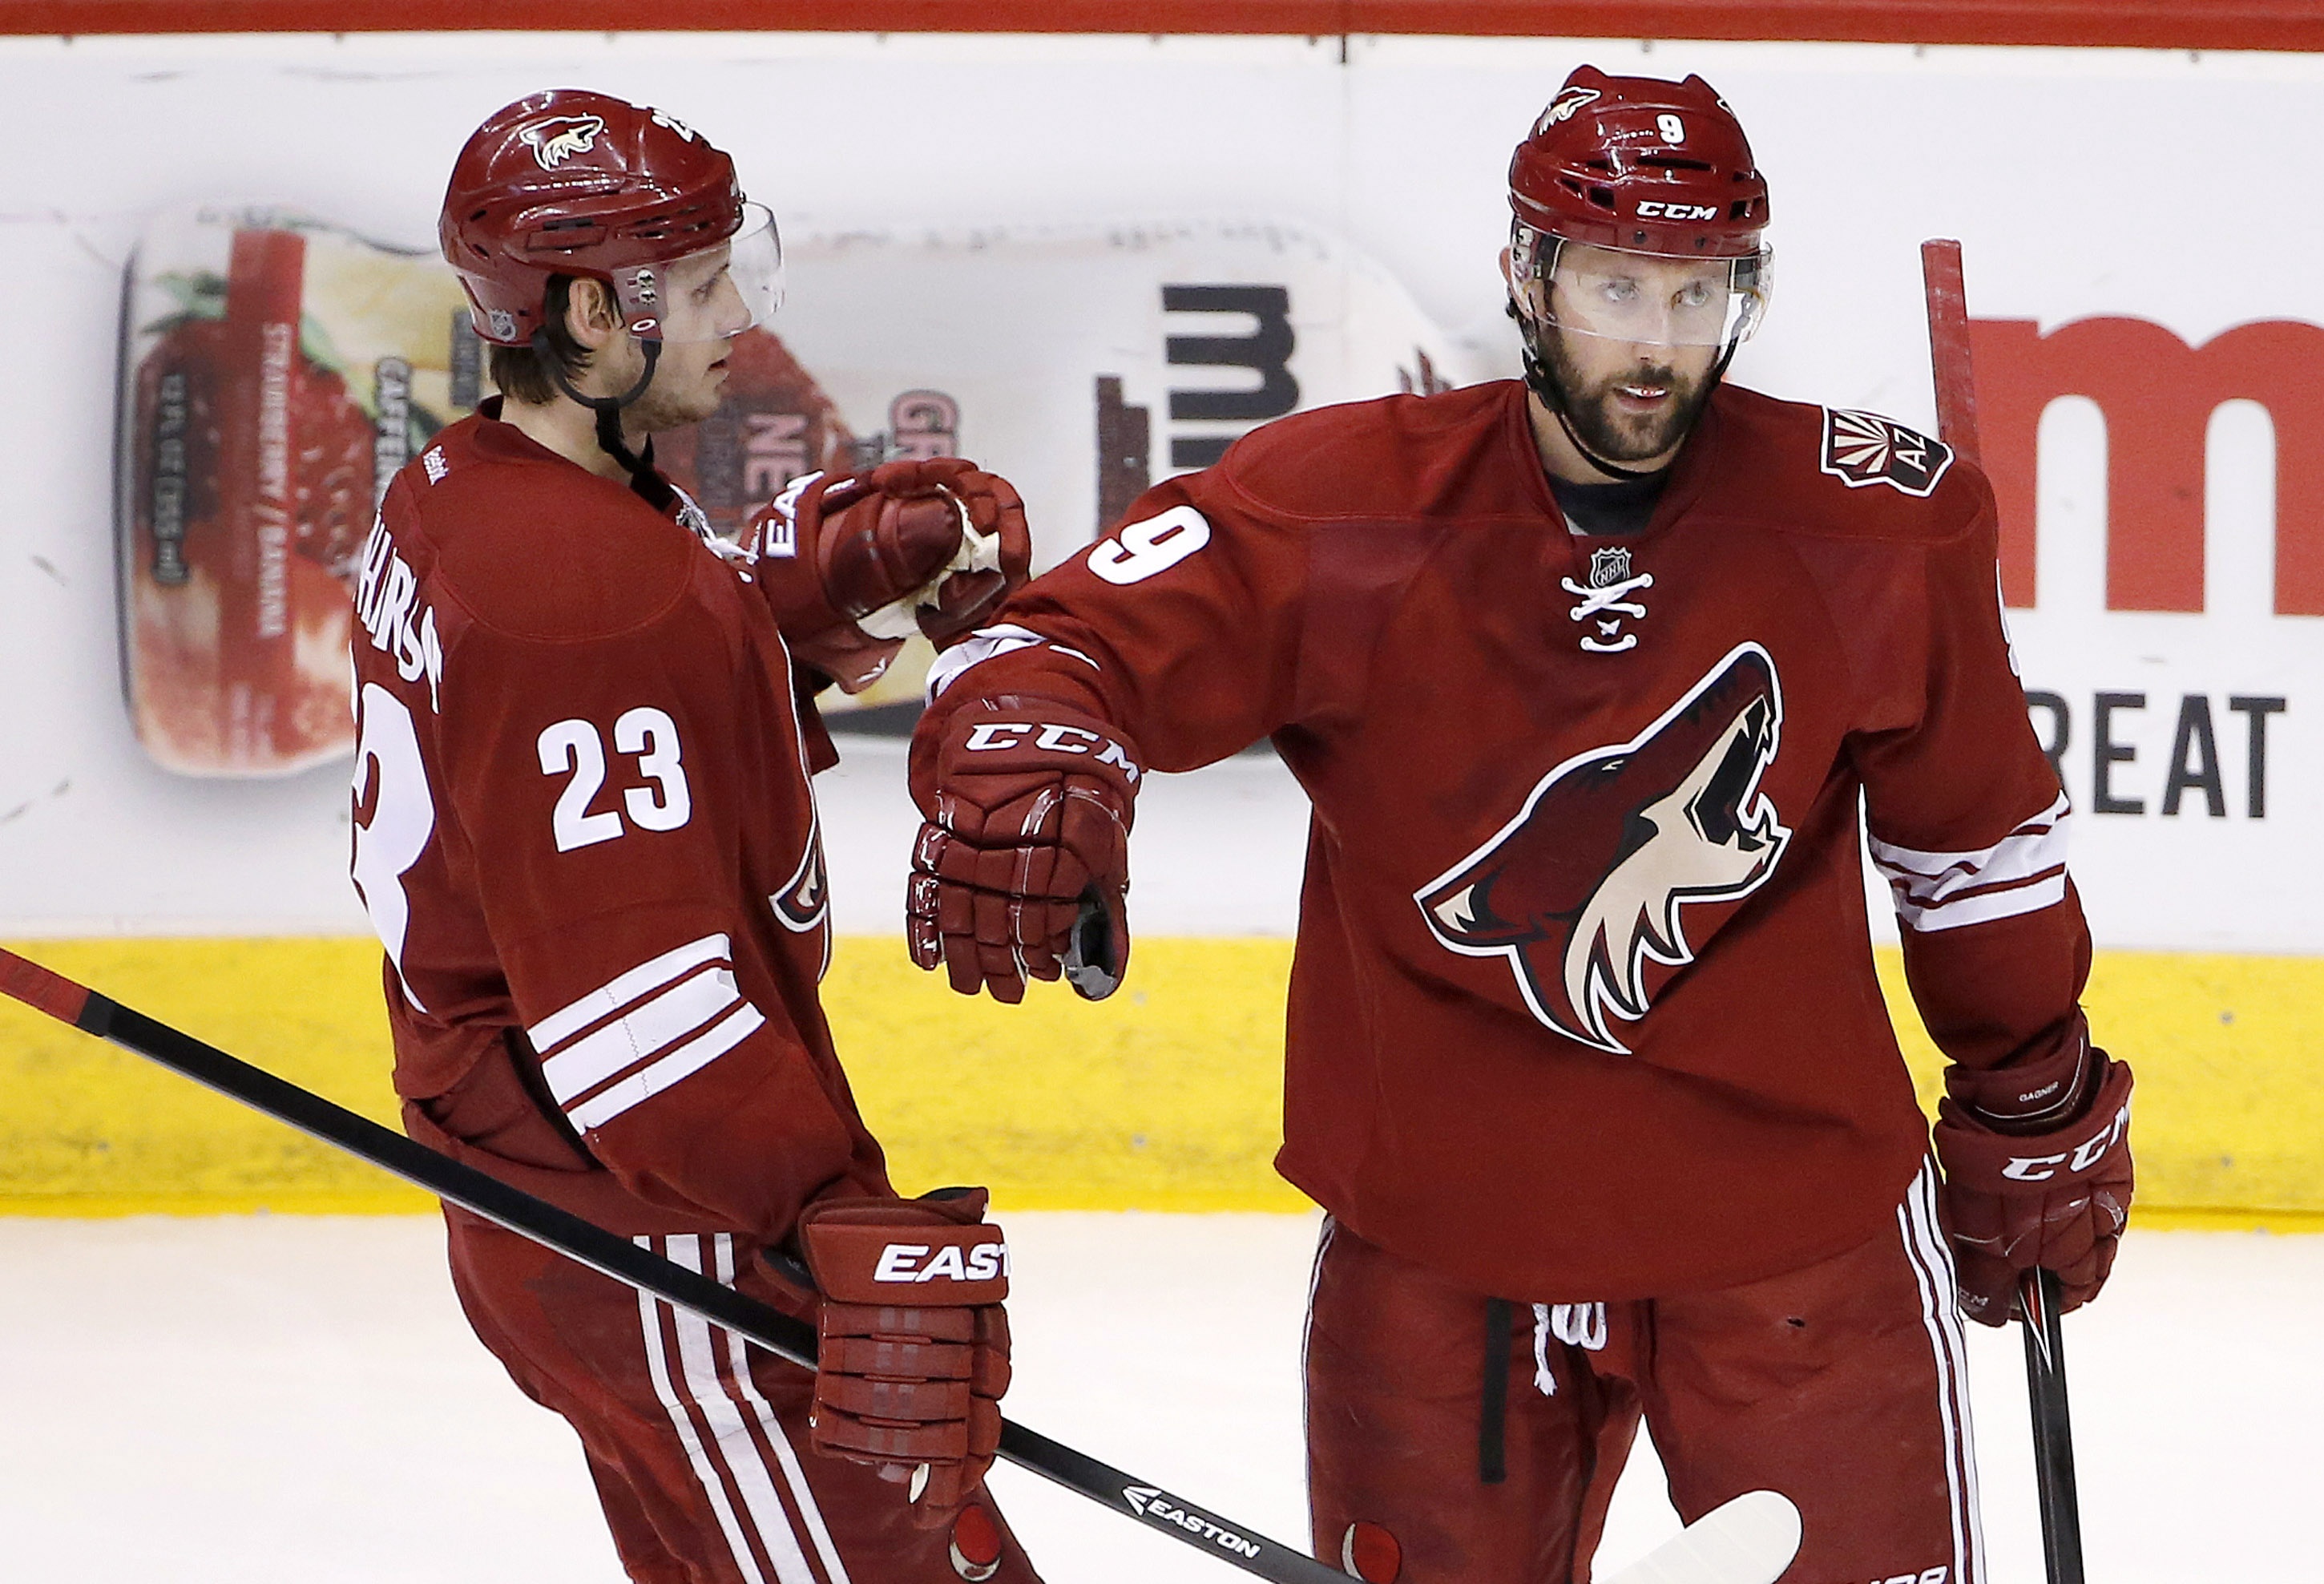 Arizona Coyotes to unveil new uniforms at draft party